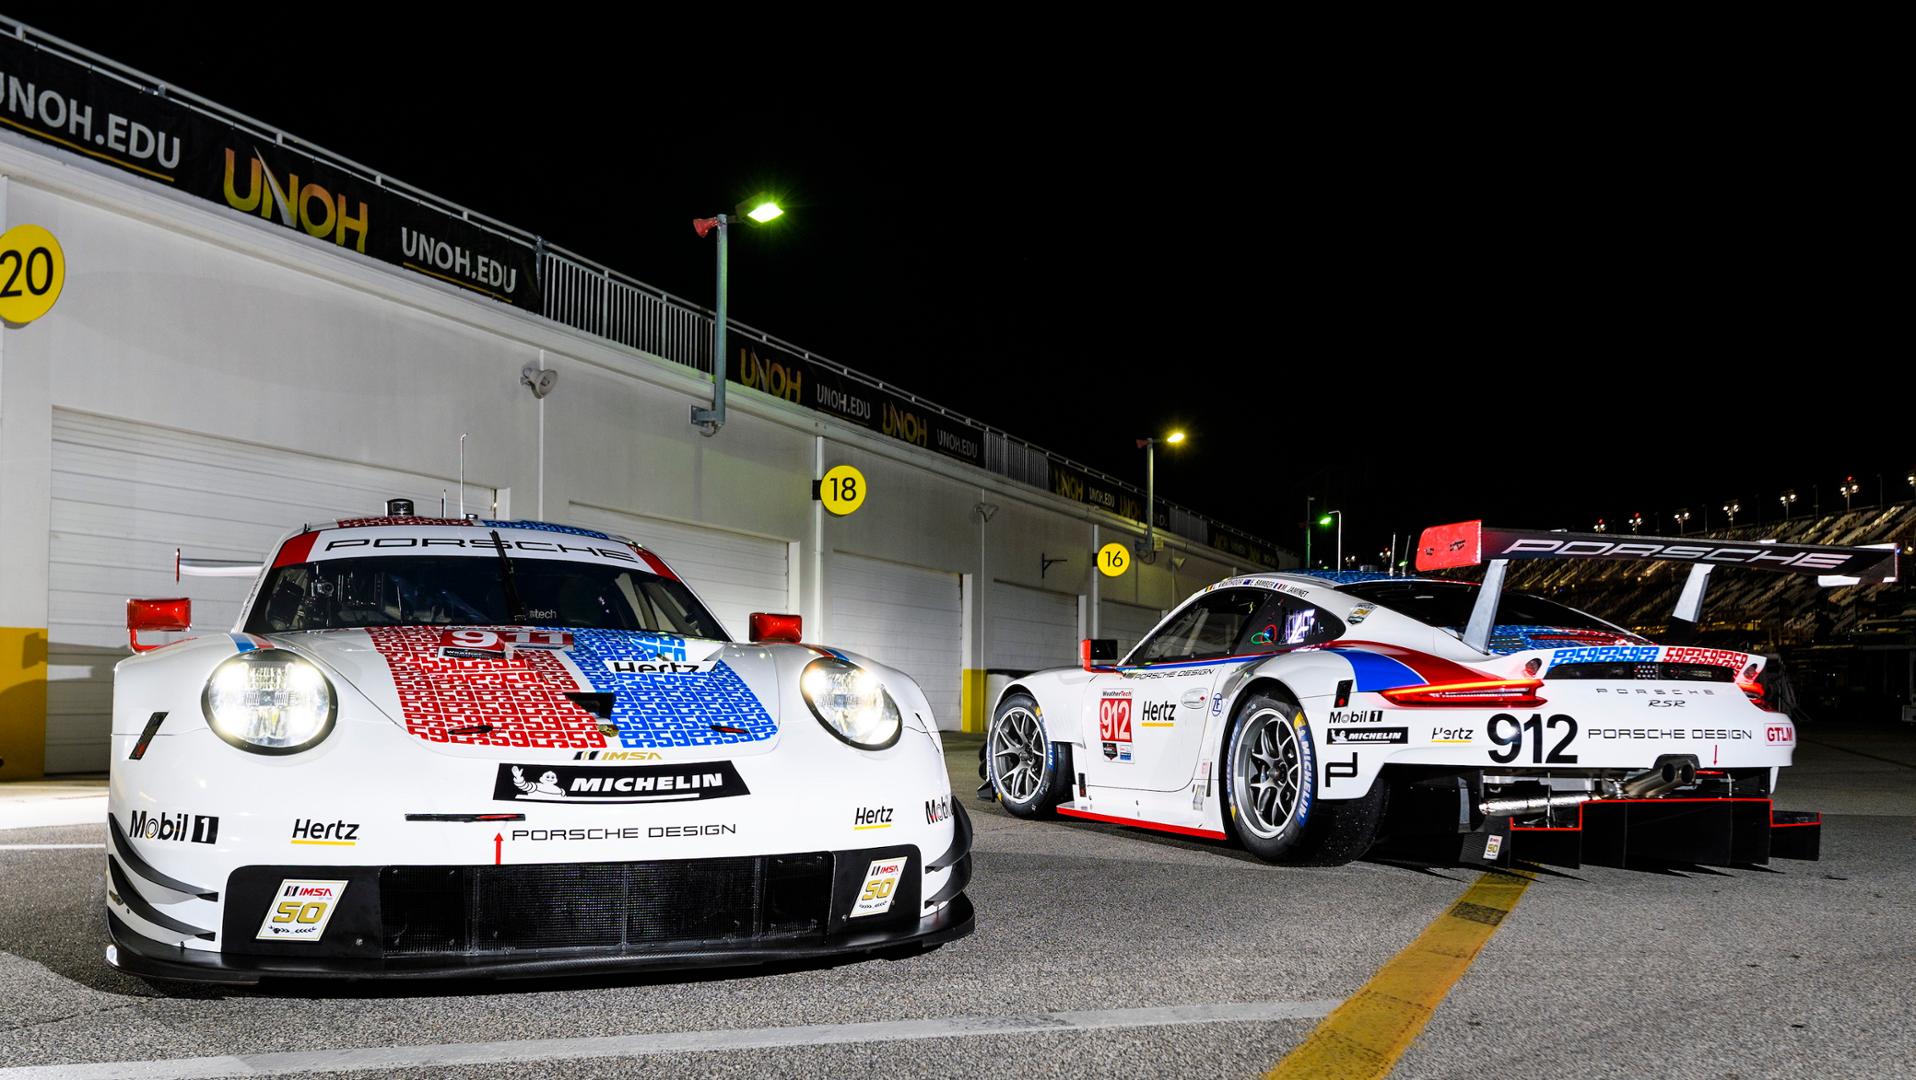 Both the #911 and #912 will run the livery